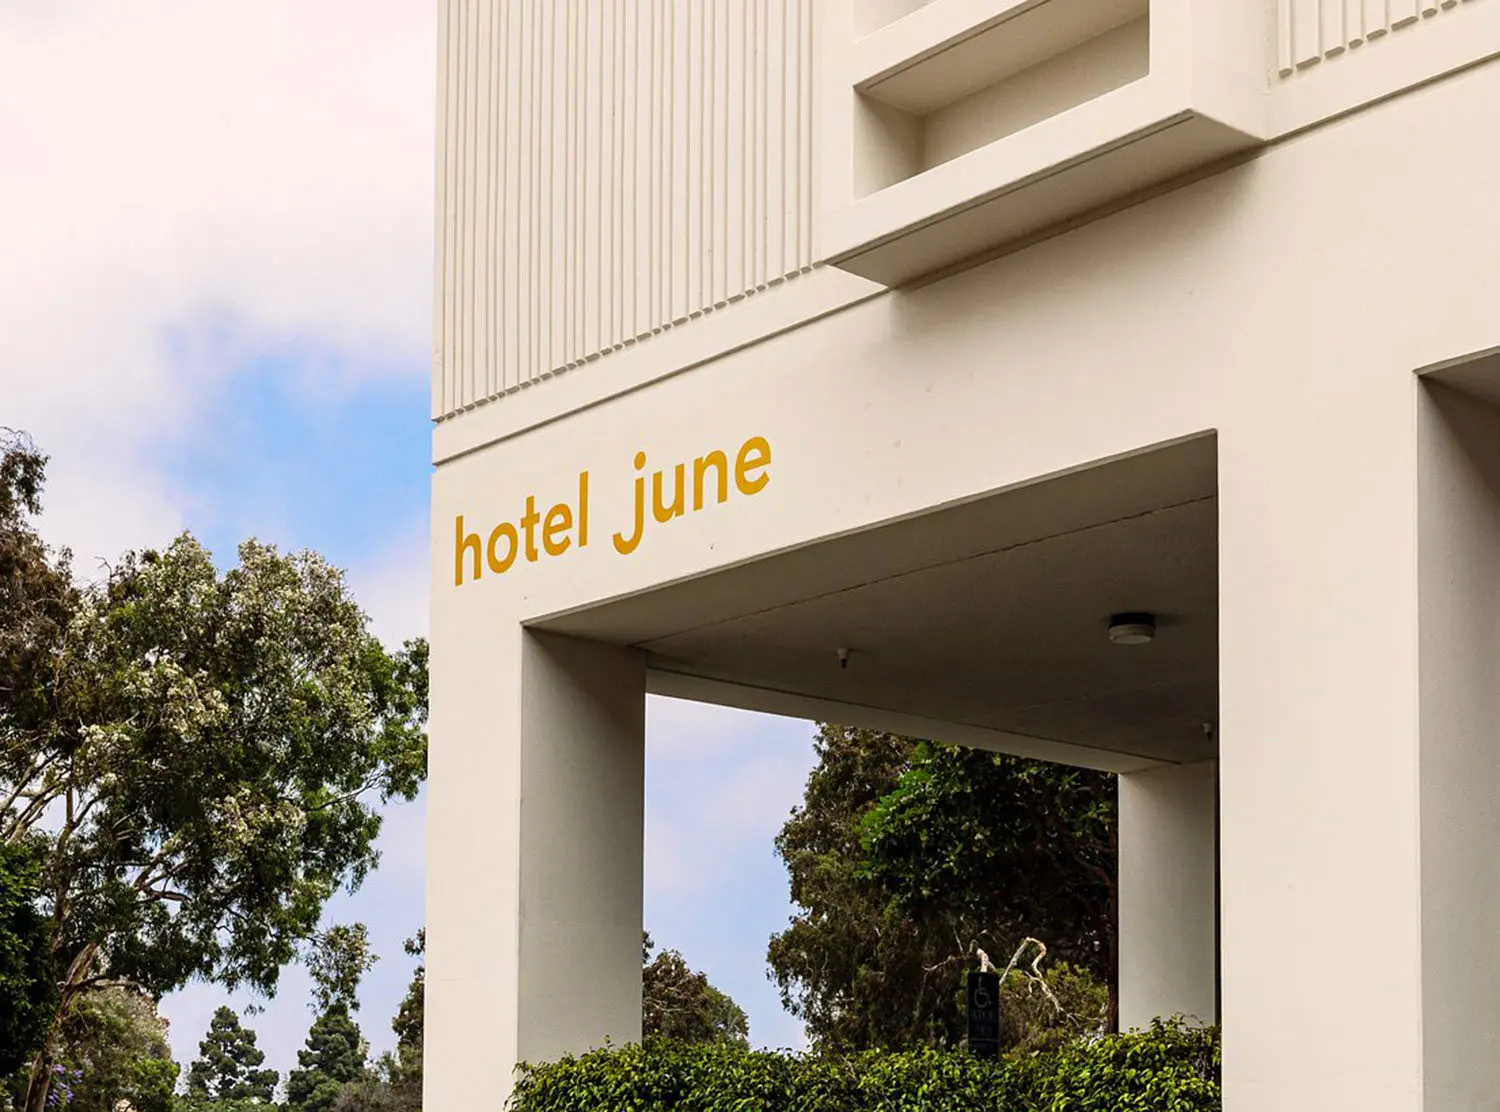 The Hotel June June keeps its façade sharp and minimal, almost setting the scene for the design glory inside